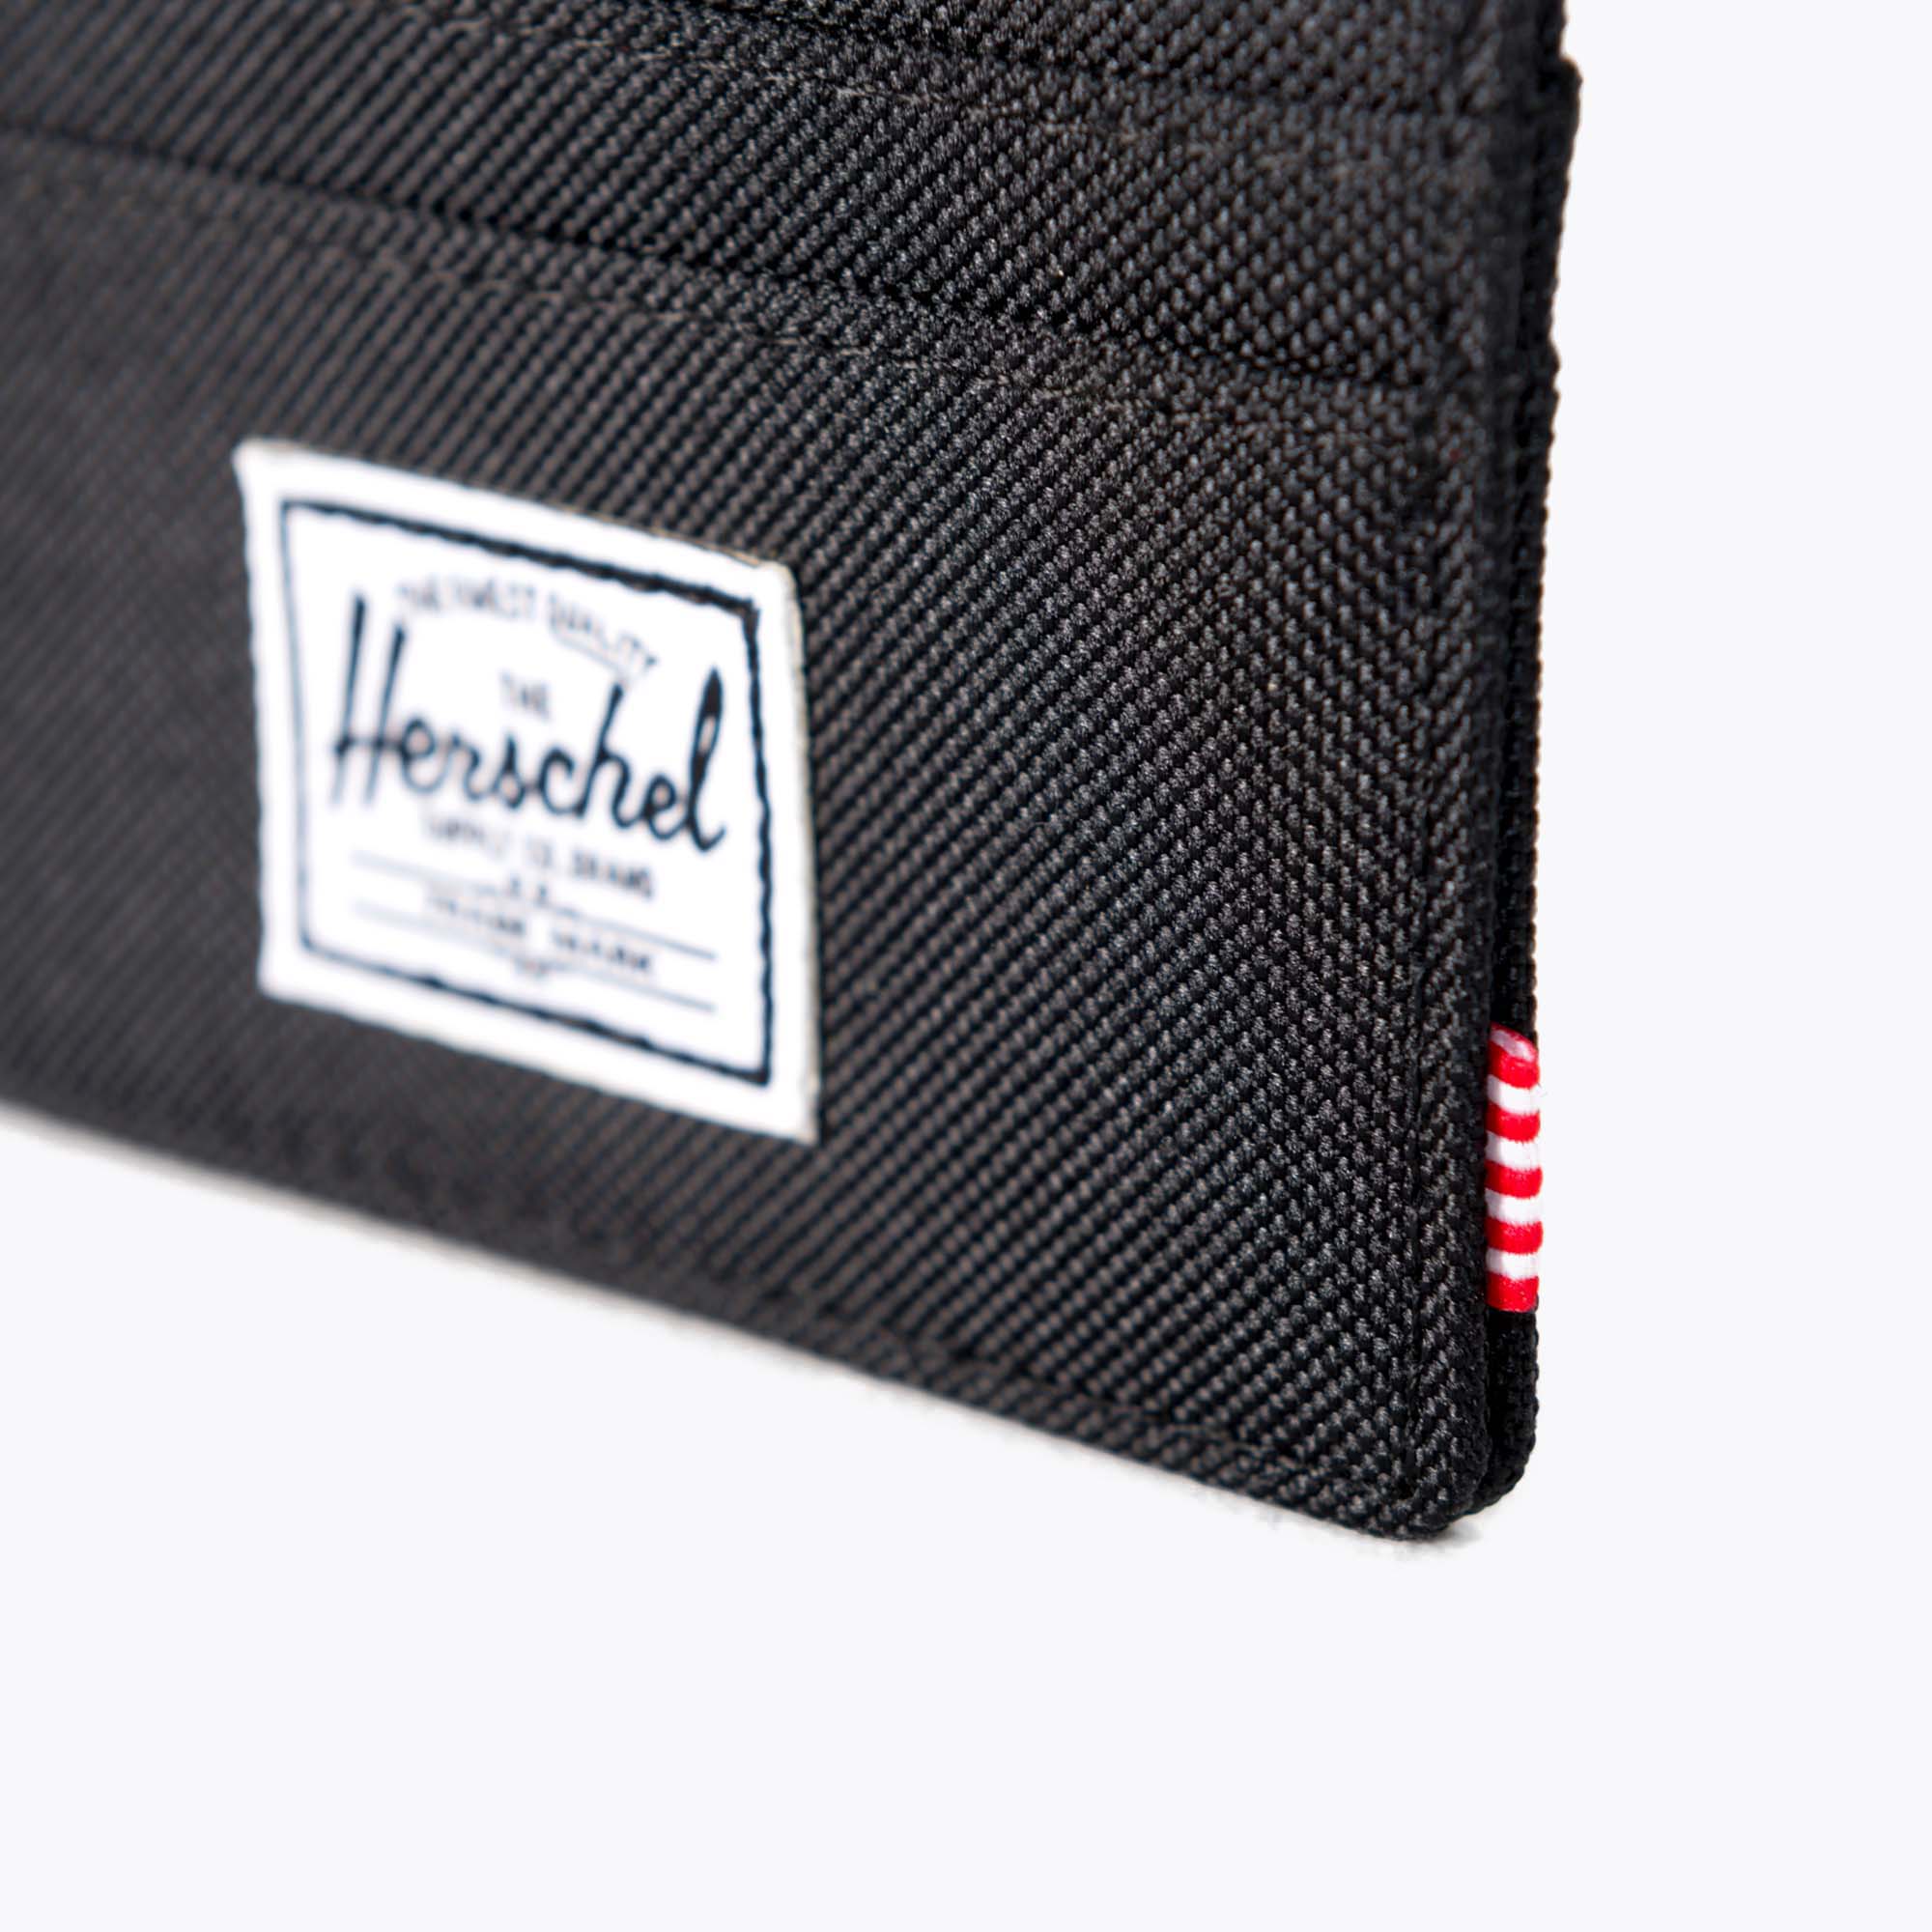 Mens Accessories Wallets and cardholders Synthetic Charlie Cardholder Wallet in Black for Men Herschel Supply Co Save 30% 